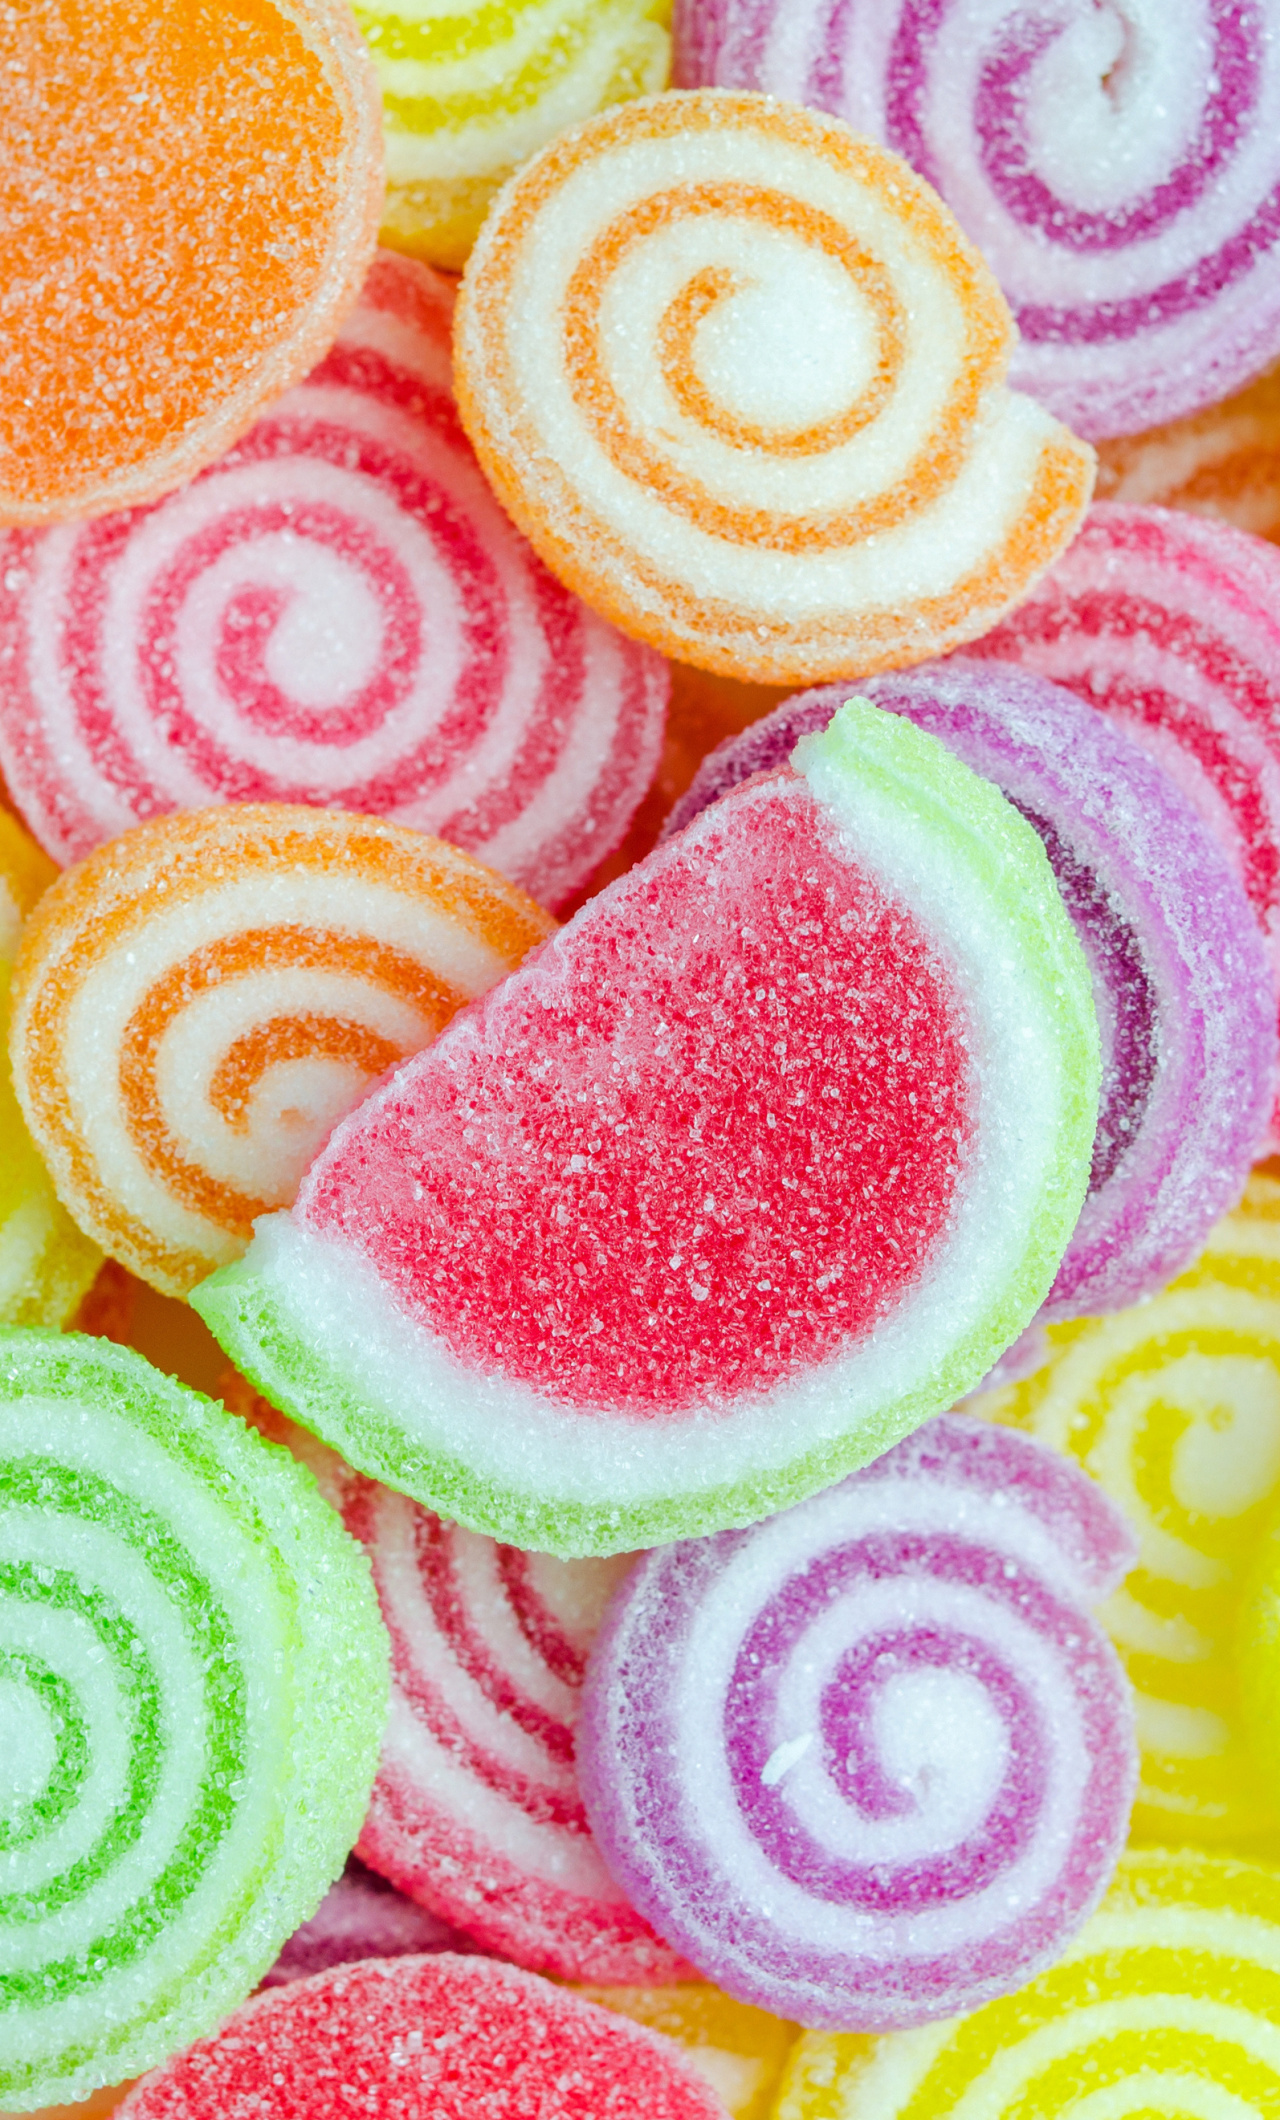 Sweet Candies, Colorful, Wallpaper - Candy Ipad - HD Wallpaper 